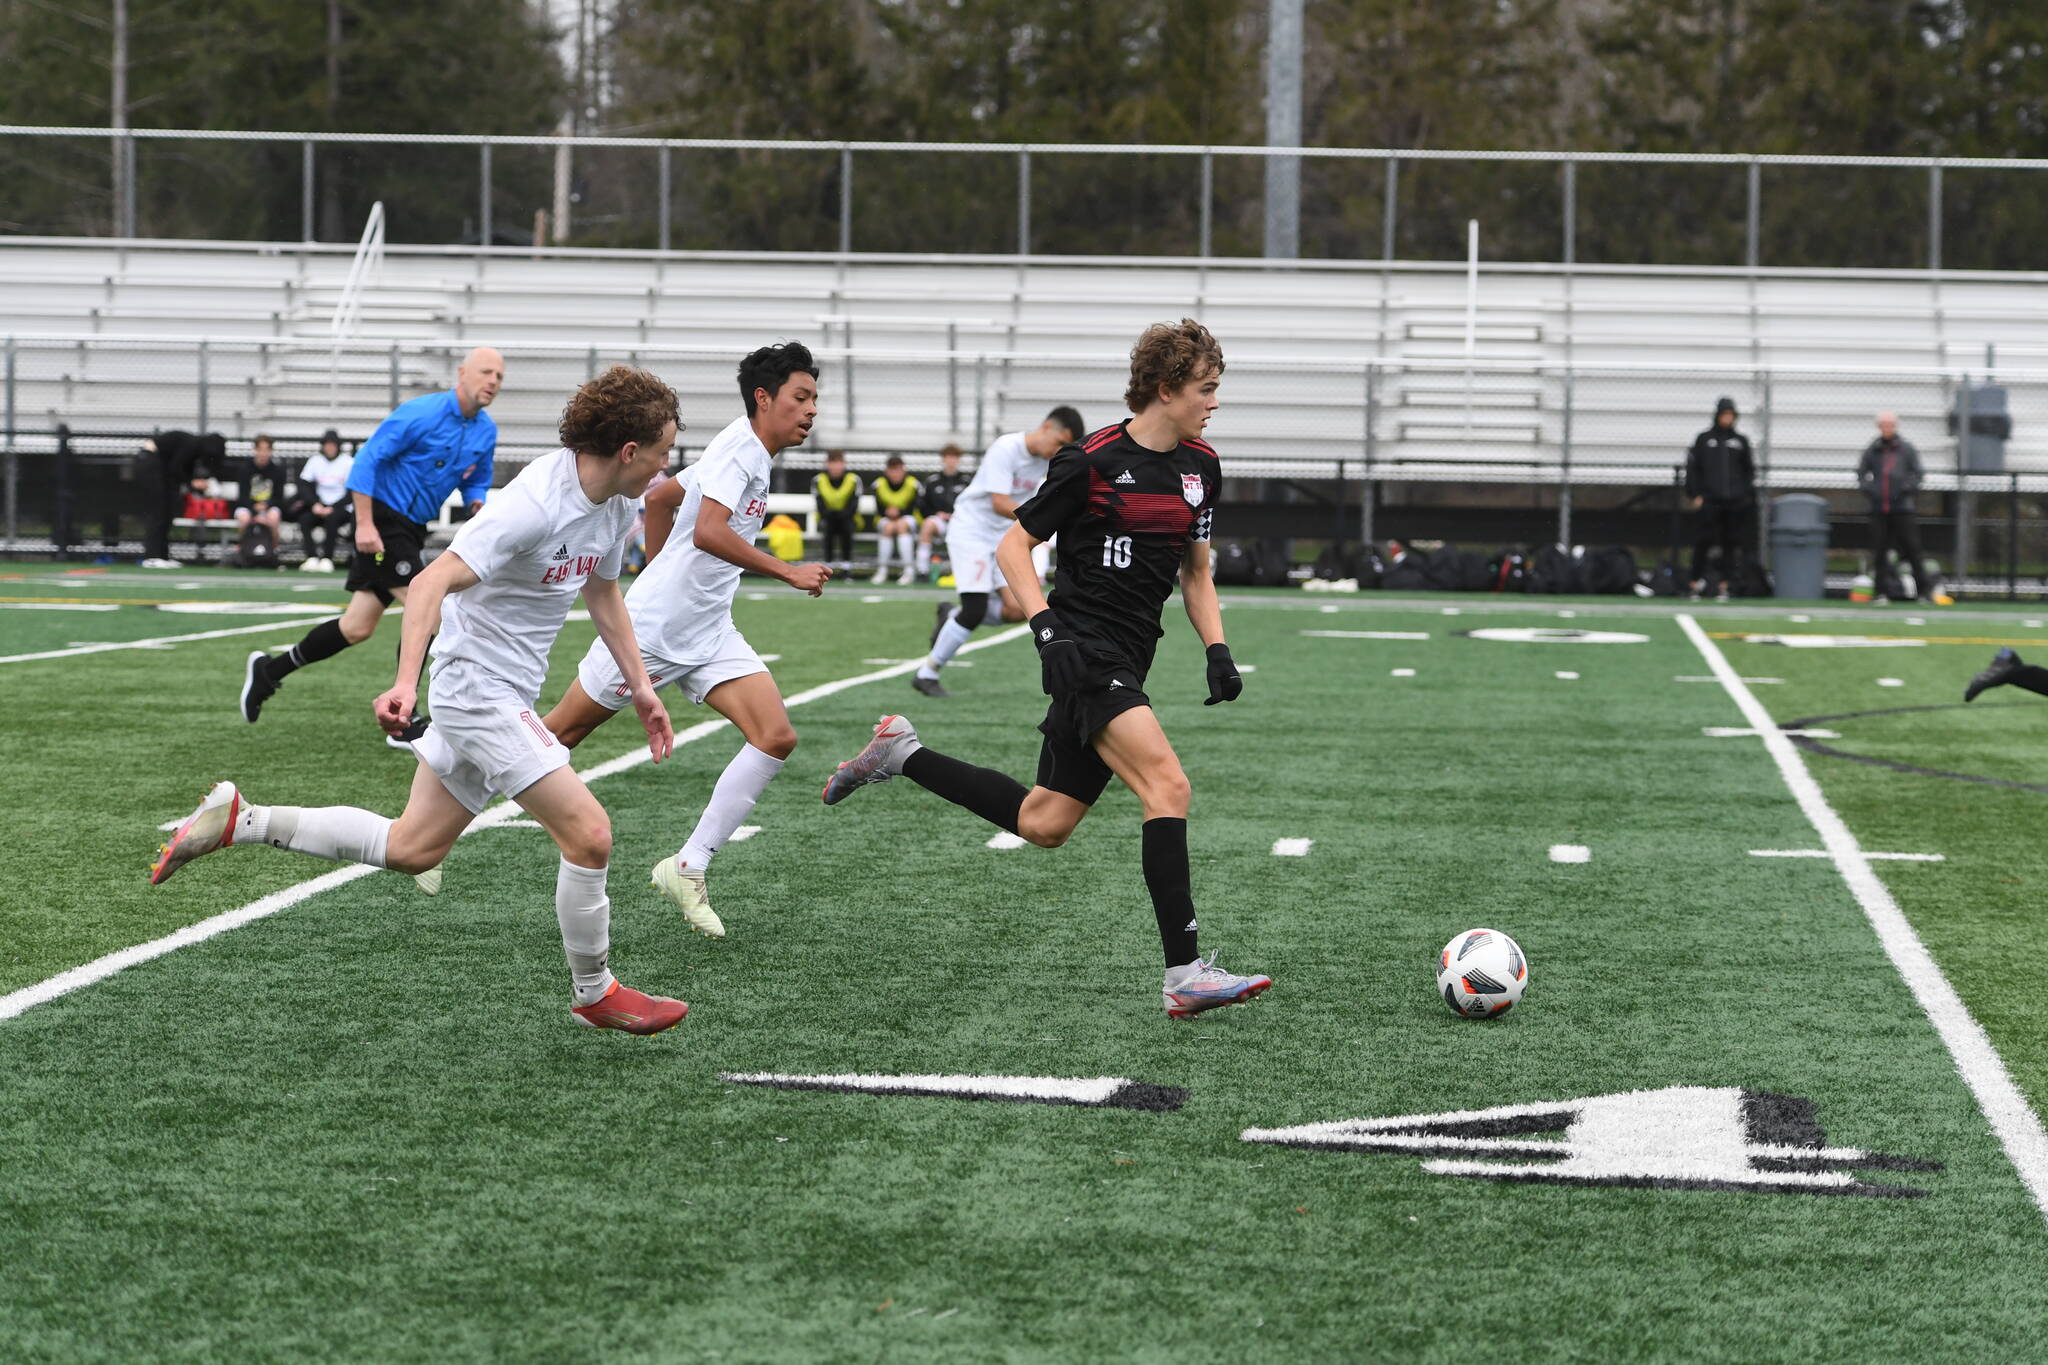 Photo courtesy of Calder Productions. Sophomore Zach Ramsey dribbles past two defenders in a 1-0 lose to East Valley (Yakima) on March 26. The Wildcats are off to a 2-1-2 record this season. They open conference play against North Creek on March 29.